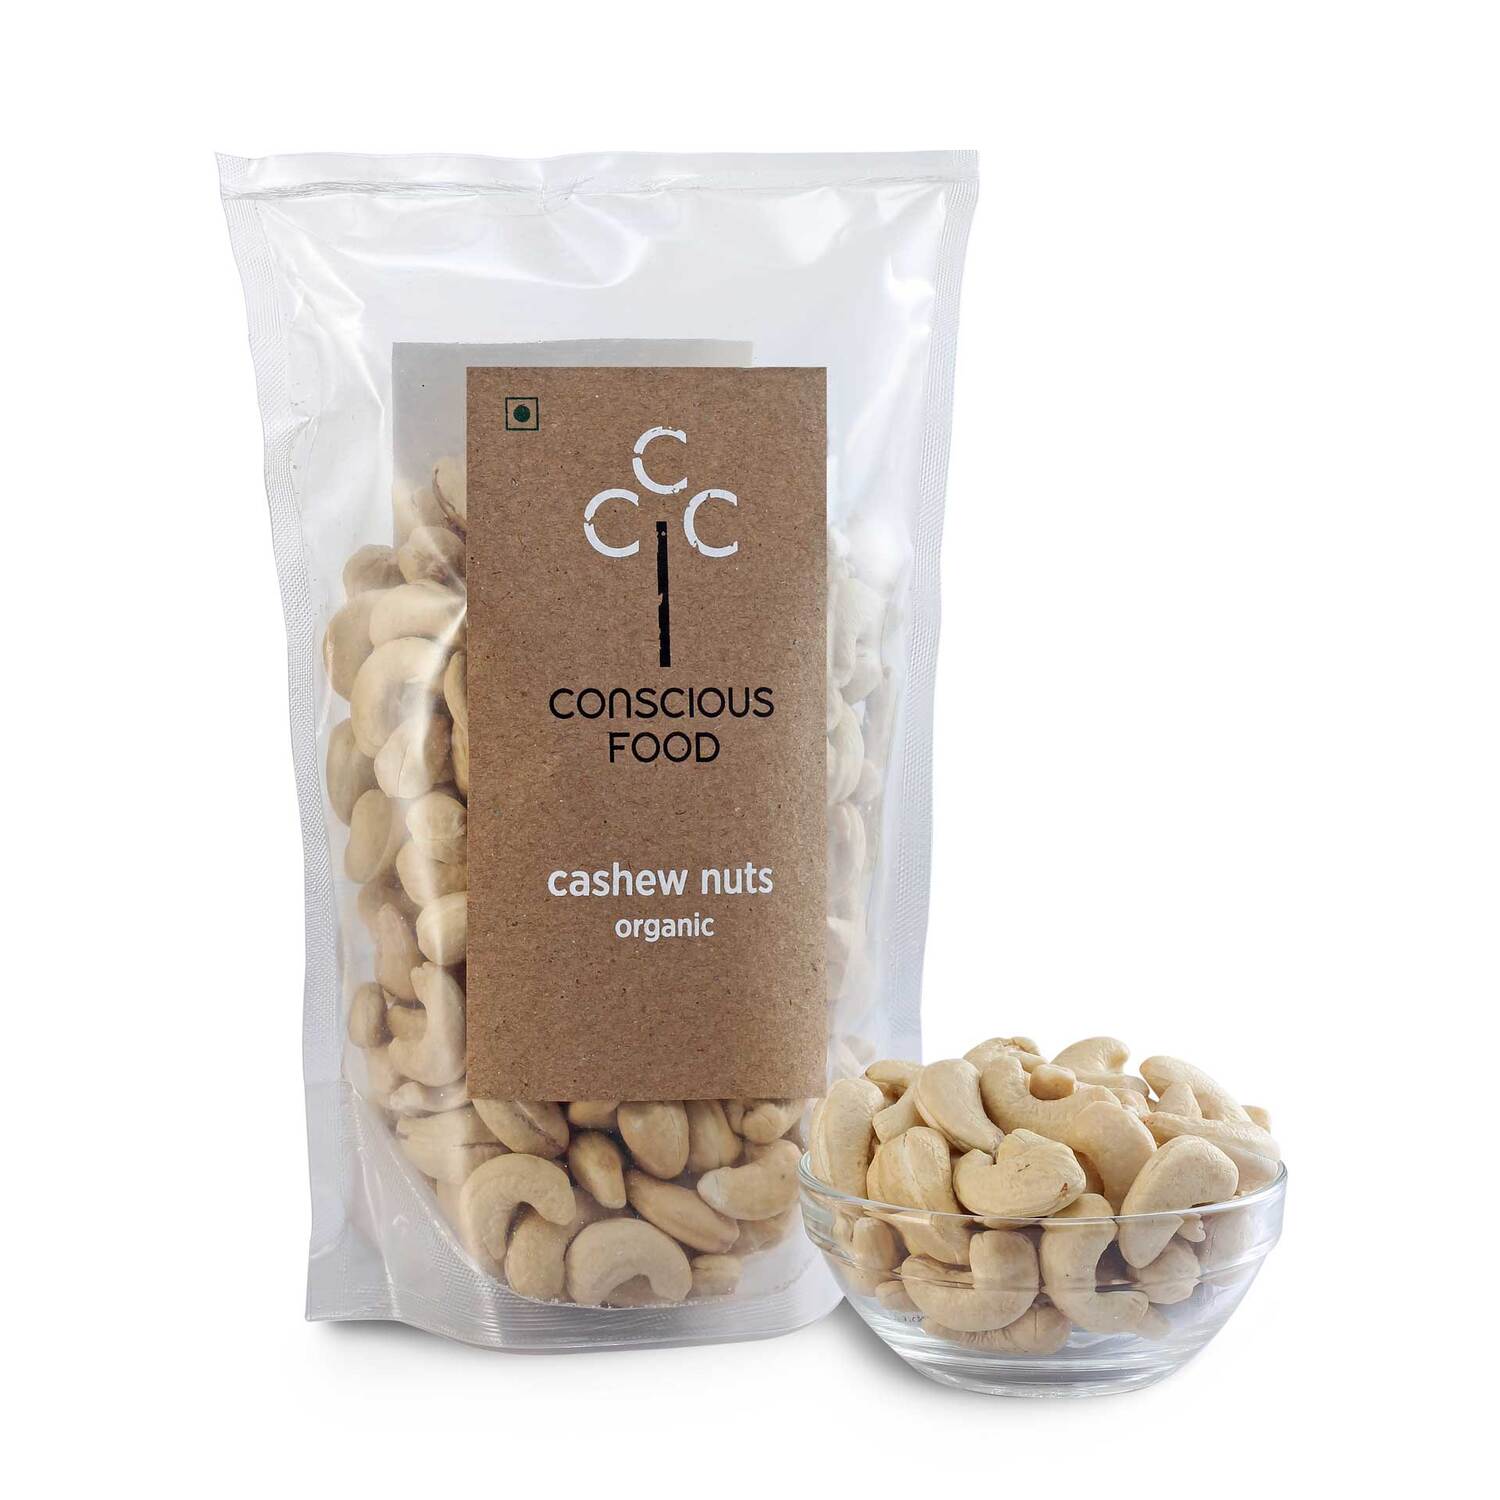 Product: Conscious Food Cashew